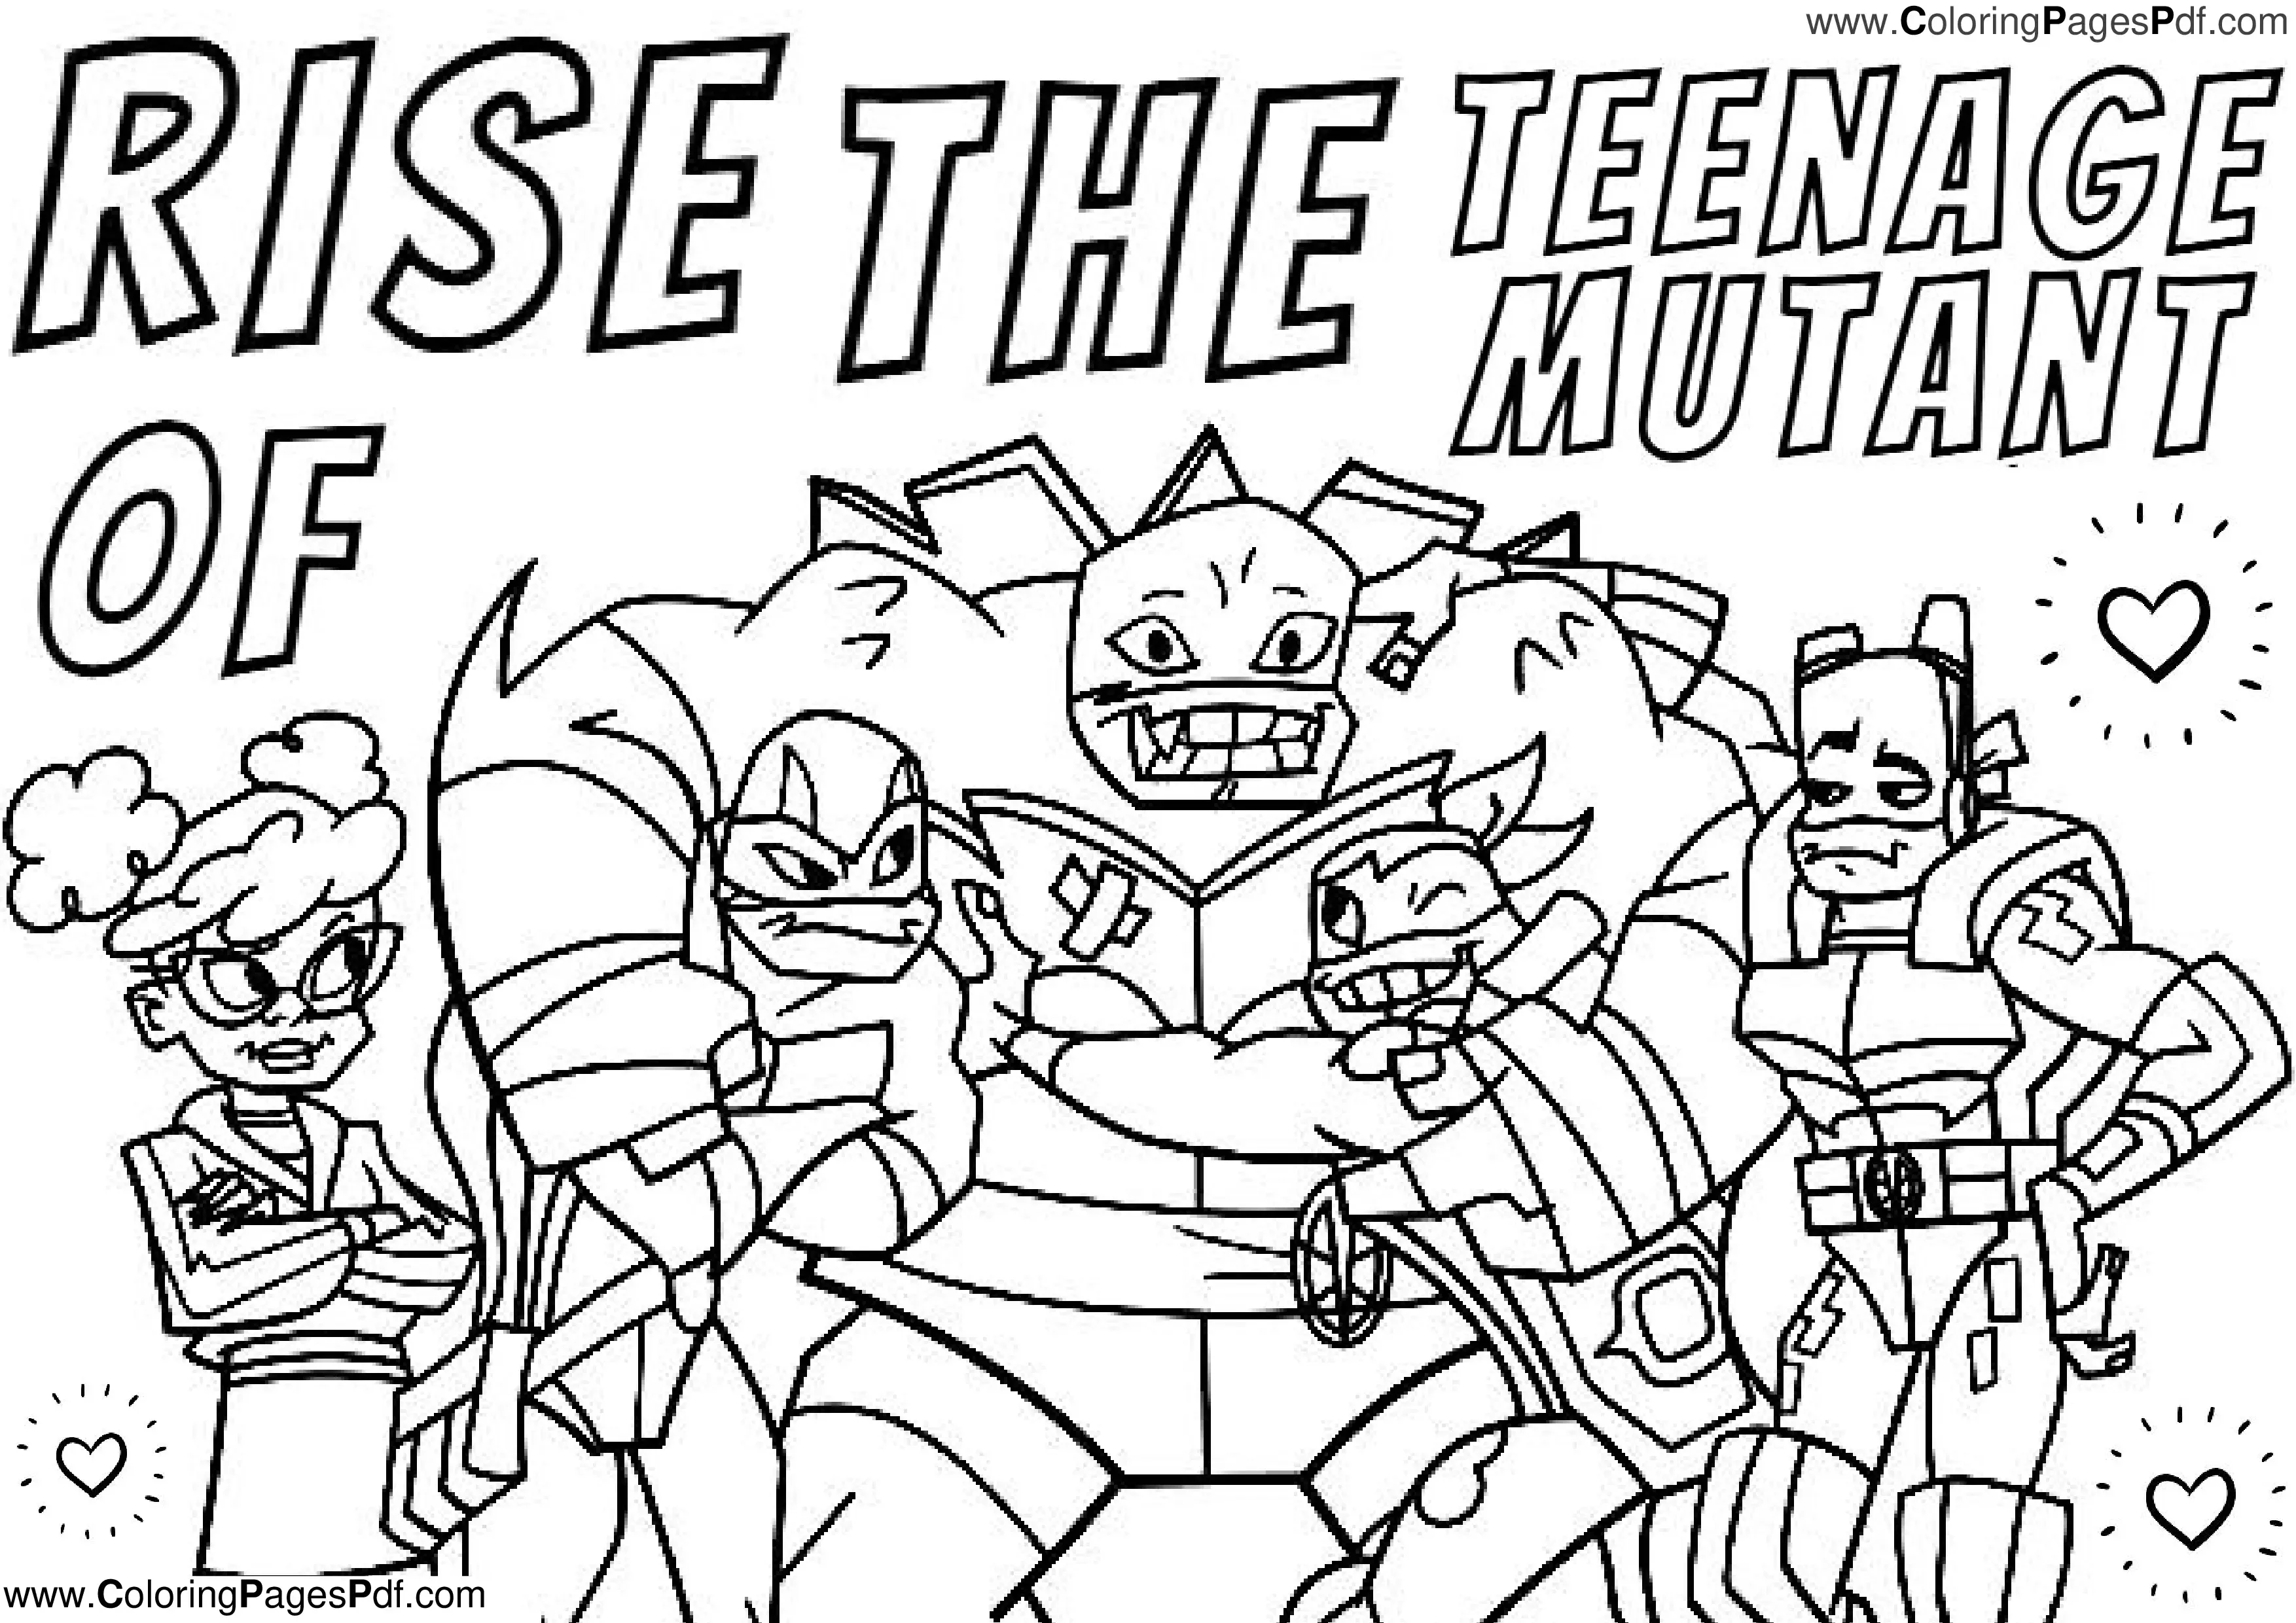 Rise of the teenage mutant ninja turtles coloring pages